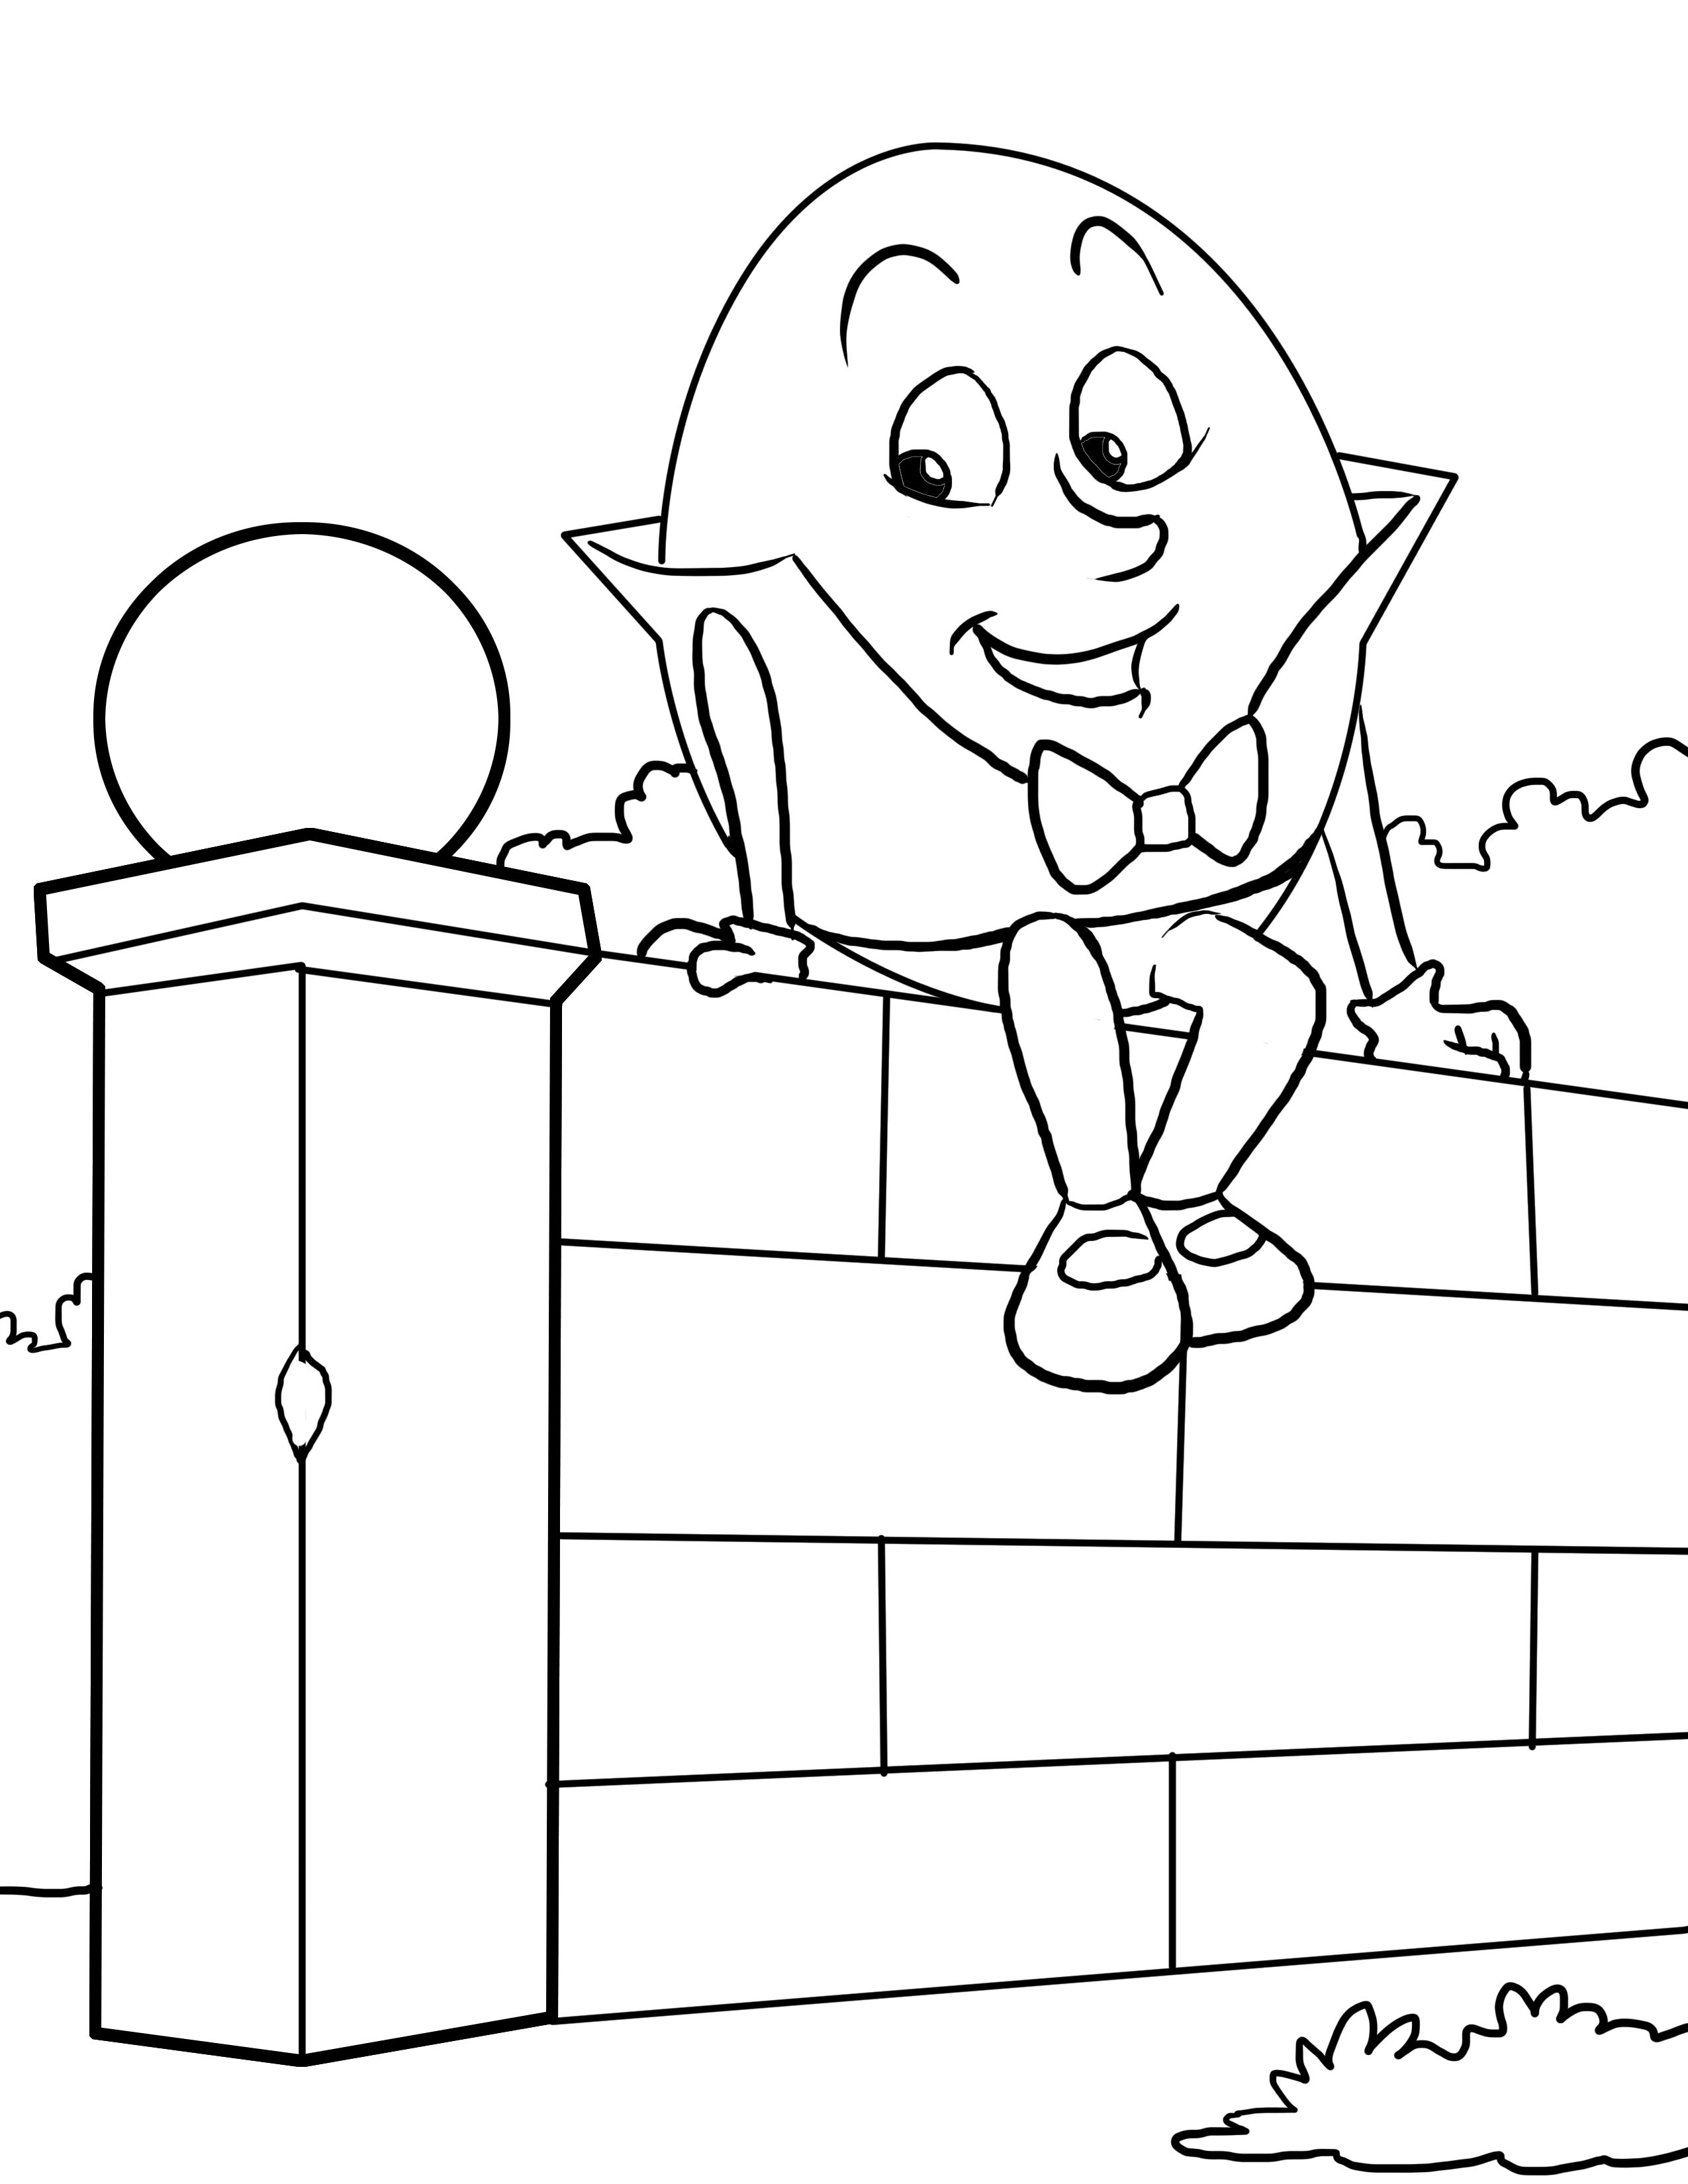 Humpty dumpty clipart colouring page, Humpty dumpty colouring page